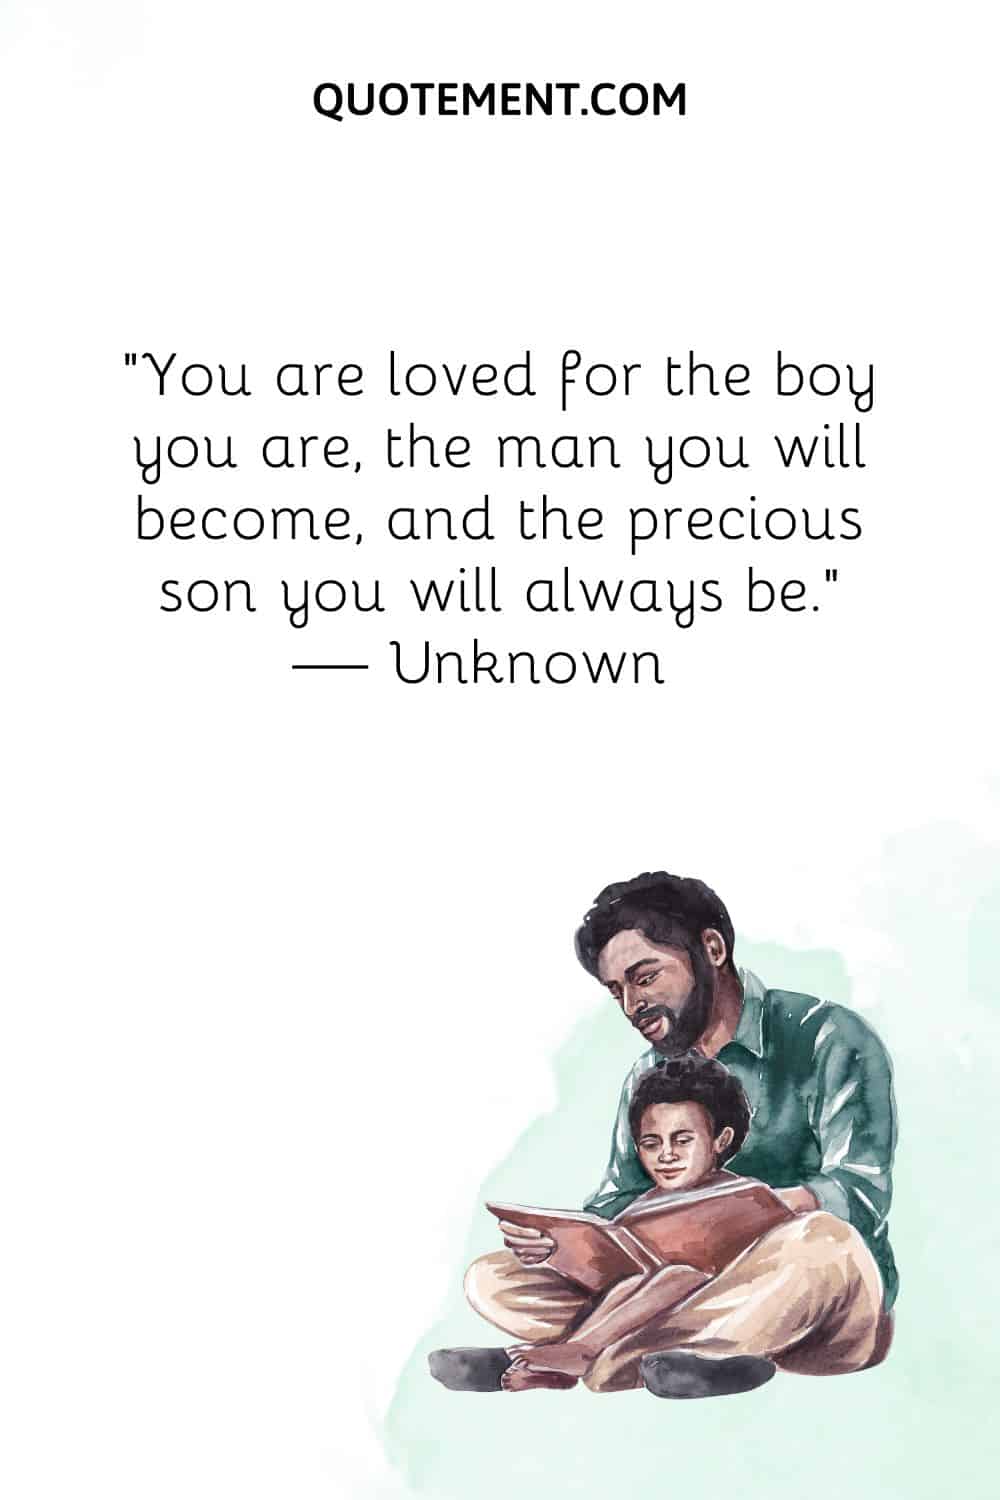 You are loved for the boy you are, the man you will become, and the precious son you will always be